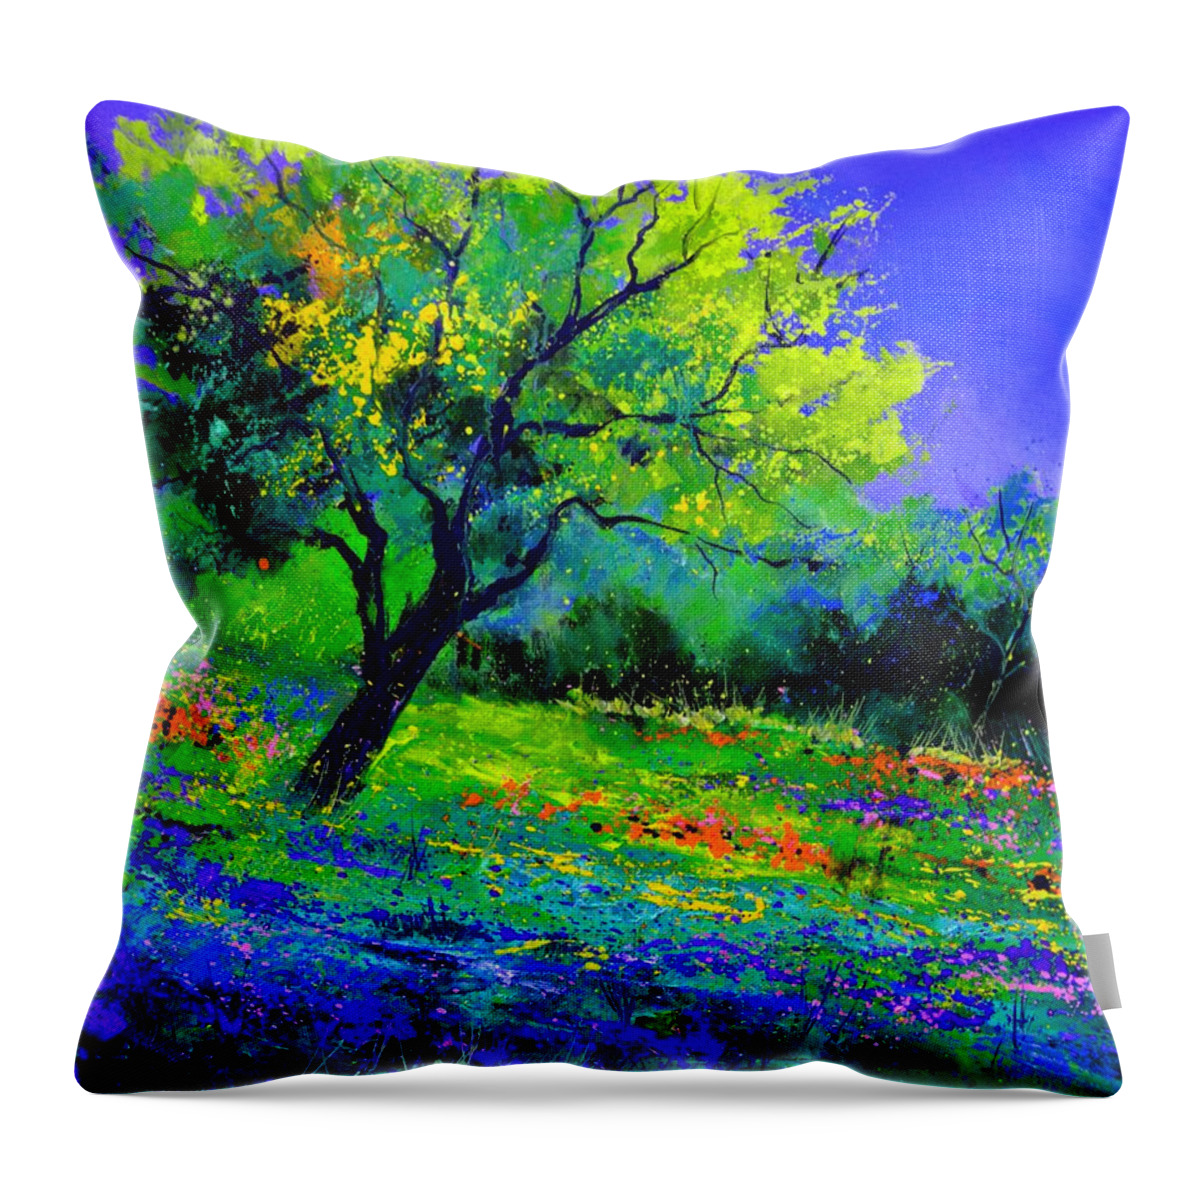 Landscape Throw Pillow featuring the painting Texan oak 764110 by Pol Ledent